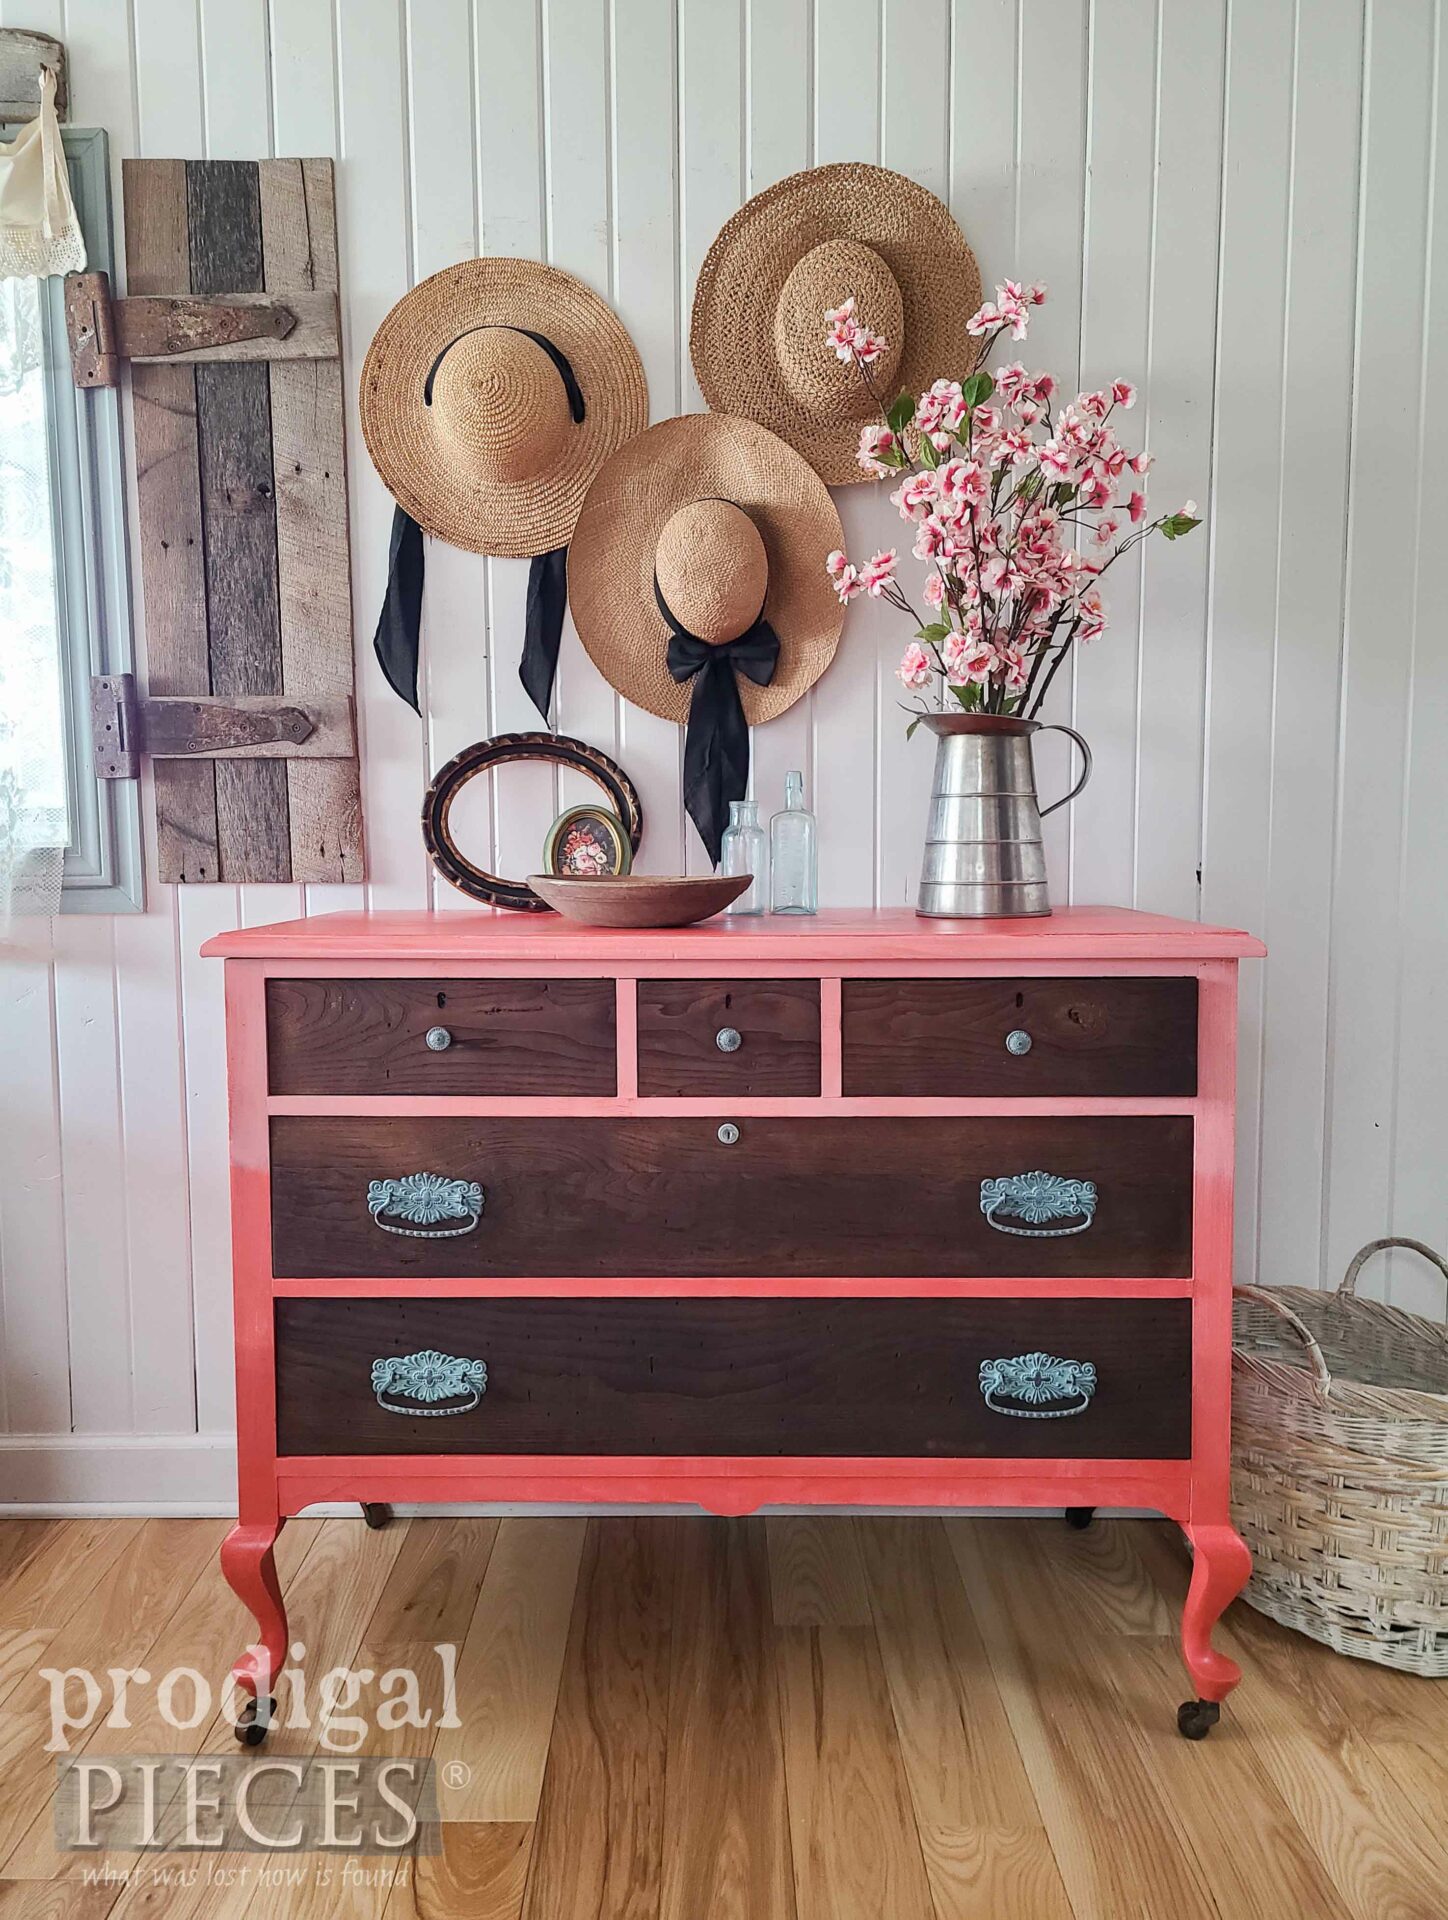 Boho Style Antique Dresser Saved from Damaged Display by Larissa of Prodigal Pieces | prodigalpieces.com #prodigalpieces #boho #farmhouse #furniture